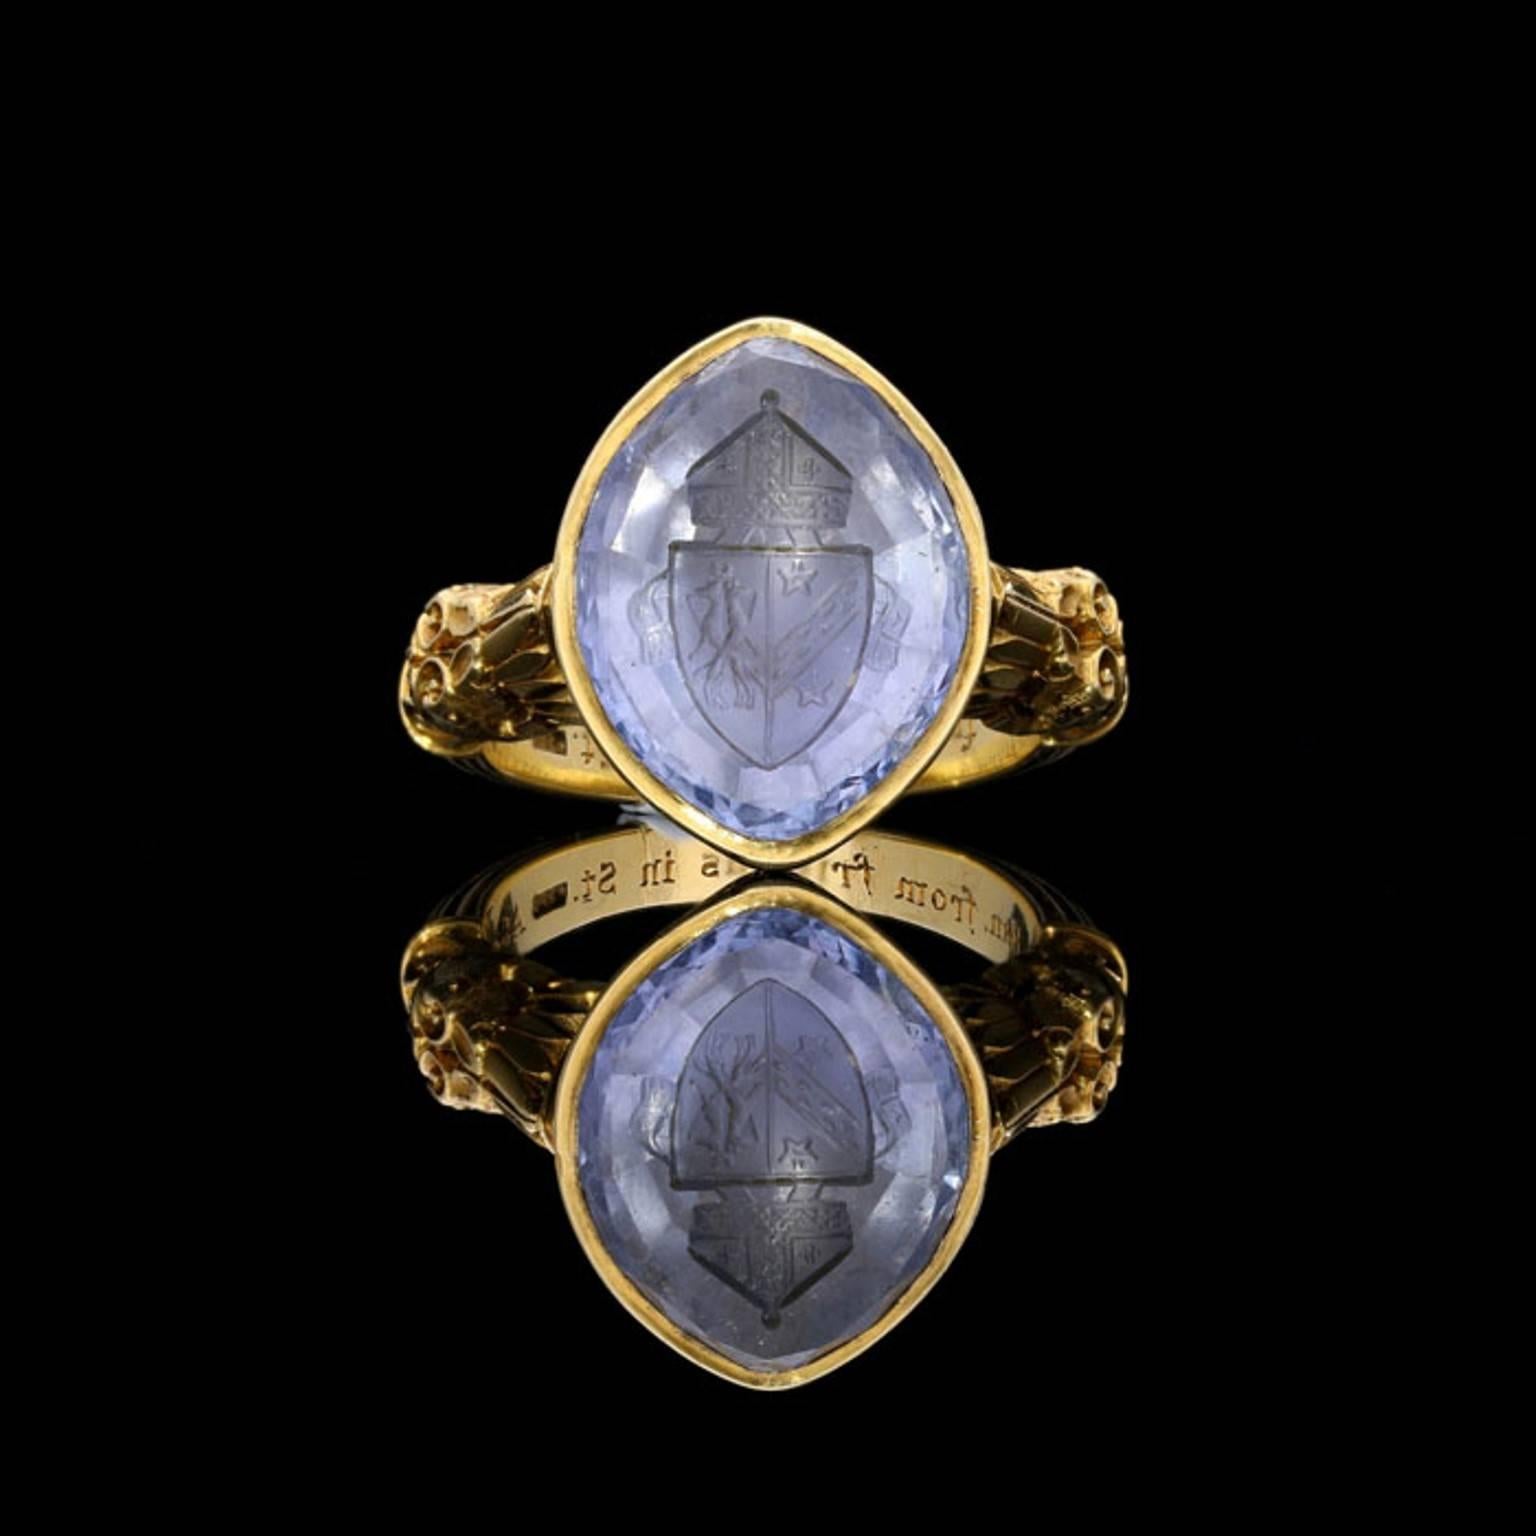 A highly decorative and ornate Bishop's ring carat 1899, finely crafted in 18 carat yellow gold with a large marquise-shaped pale blue sapphire intaglio carved with a mitre atop a shield depicting the coat of arms for Bangor coupled with that of